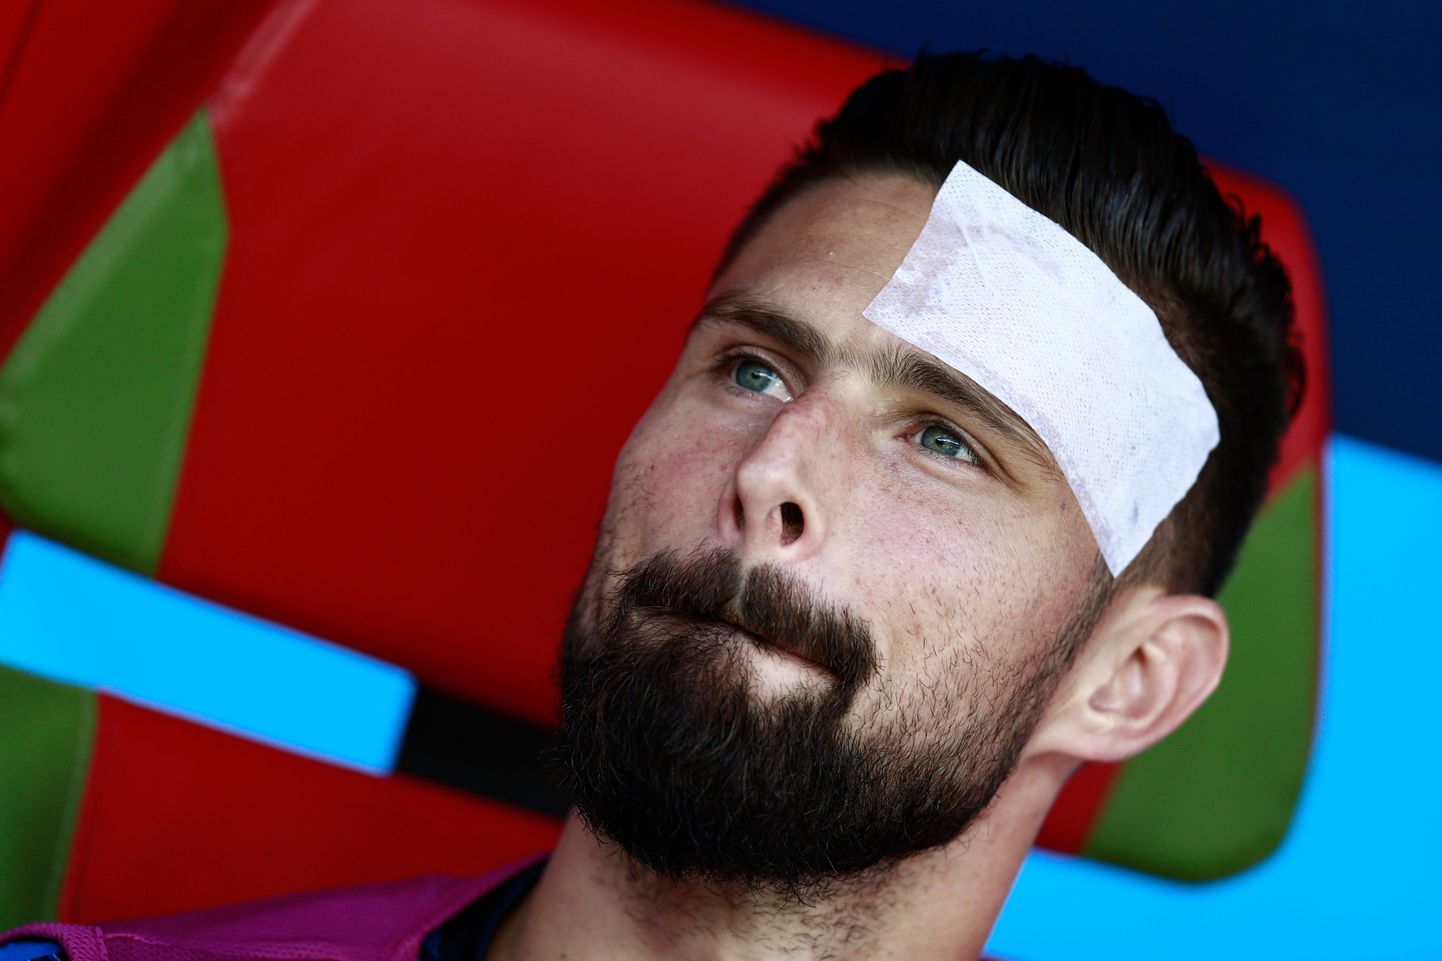 France's forward Olivier Giroud looks on from the bench during the Russia 2018 World Cup Group C football match between France and Australia at the Kazan Arena in Kazan on June 16, 2018. / AFP PHOTO / BENJAMIN CREMEL / RESTRICTED TO EDITORIAL USE - NO MOBILE PUSH ALERTS/DOWNLOADS